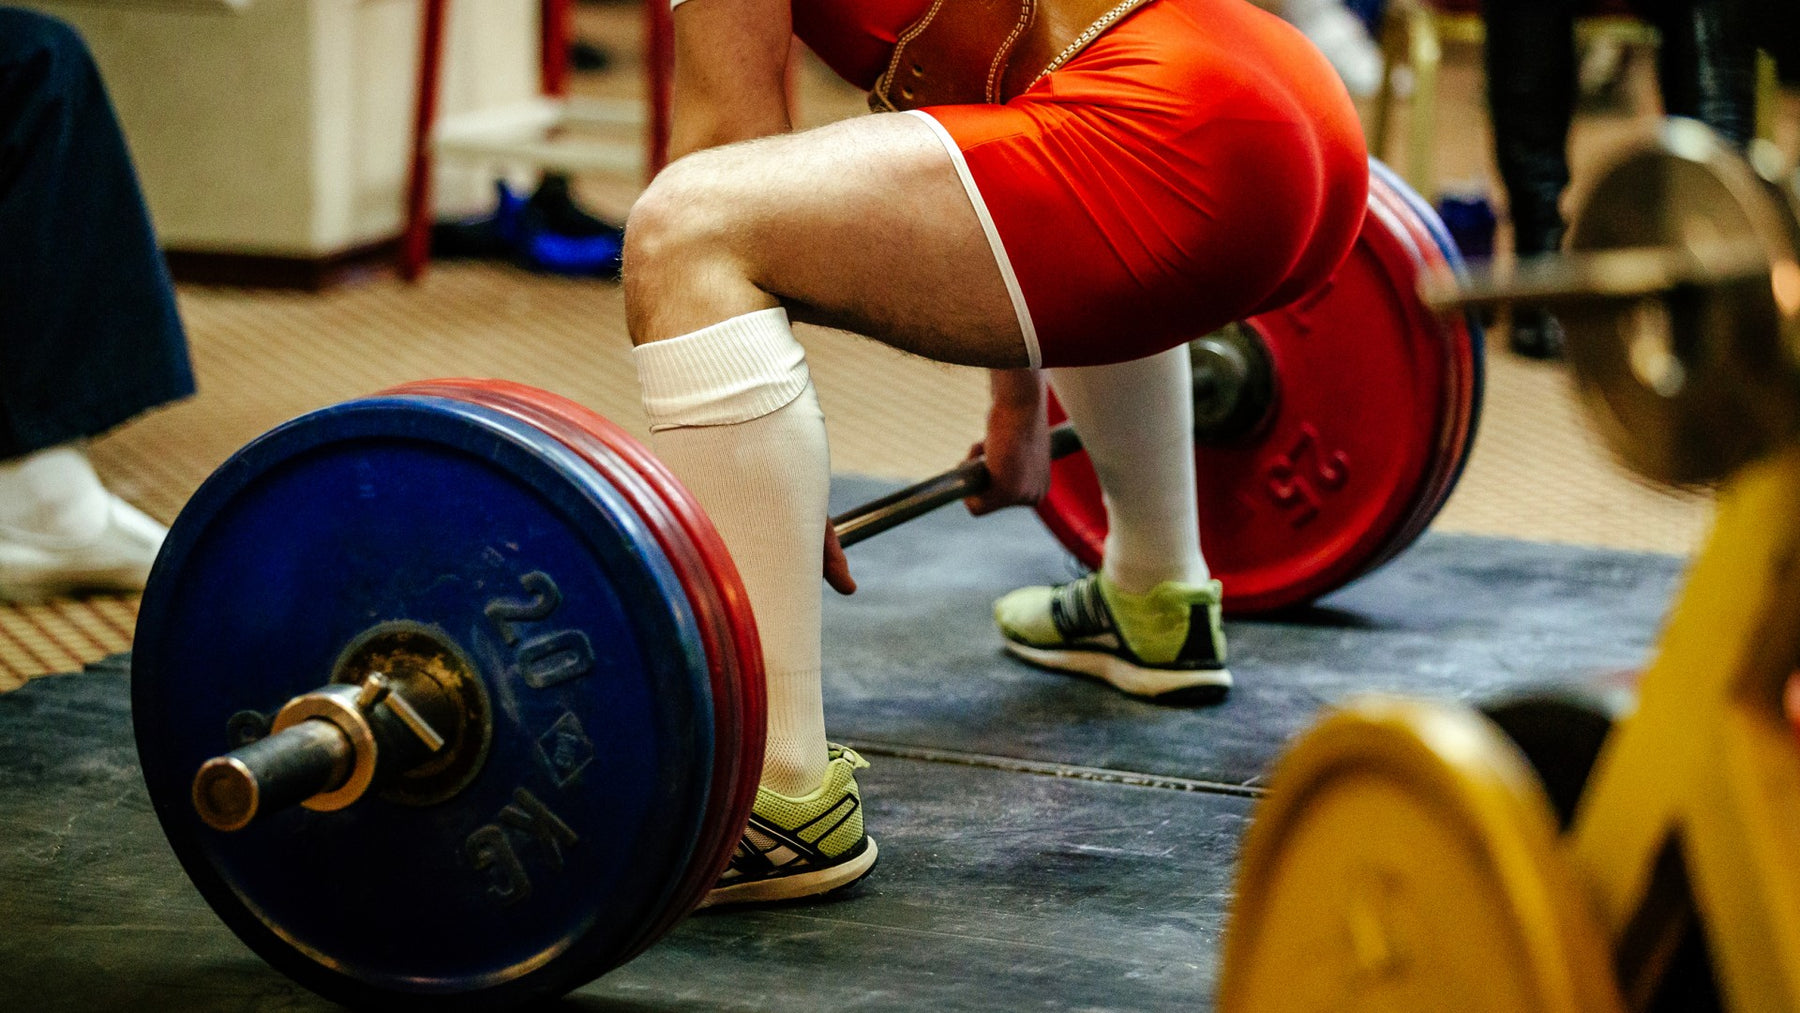 10 Reasons Why Powerlifting Routines Should Be More Popular